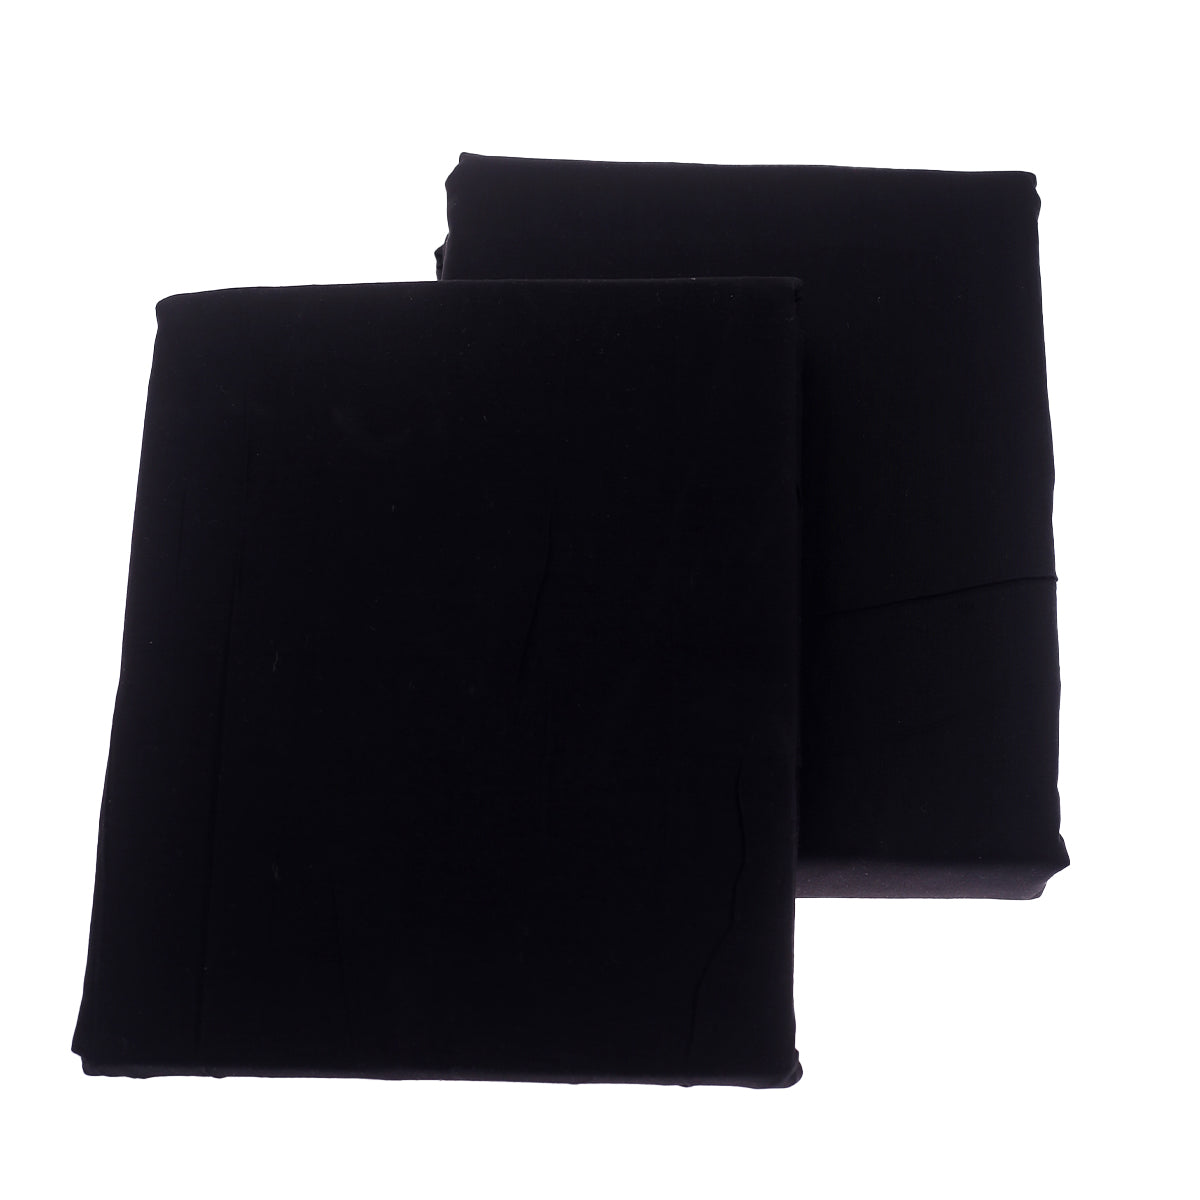 Black Dyed Double Bedding Set of 6